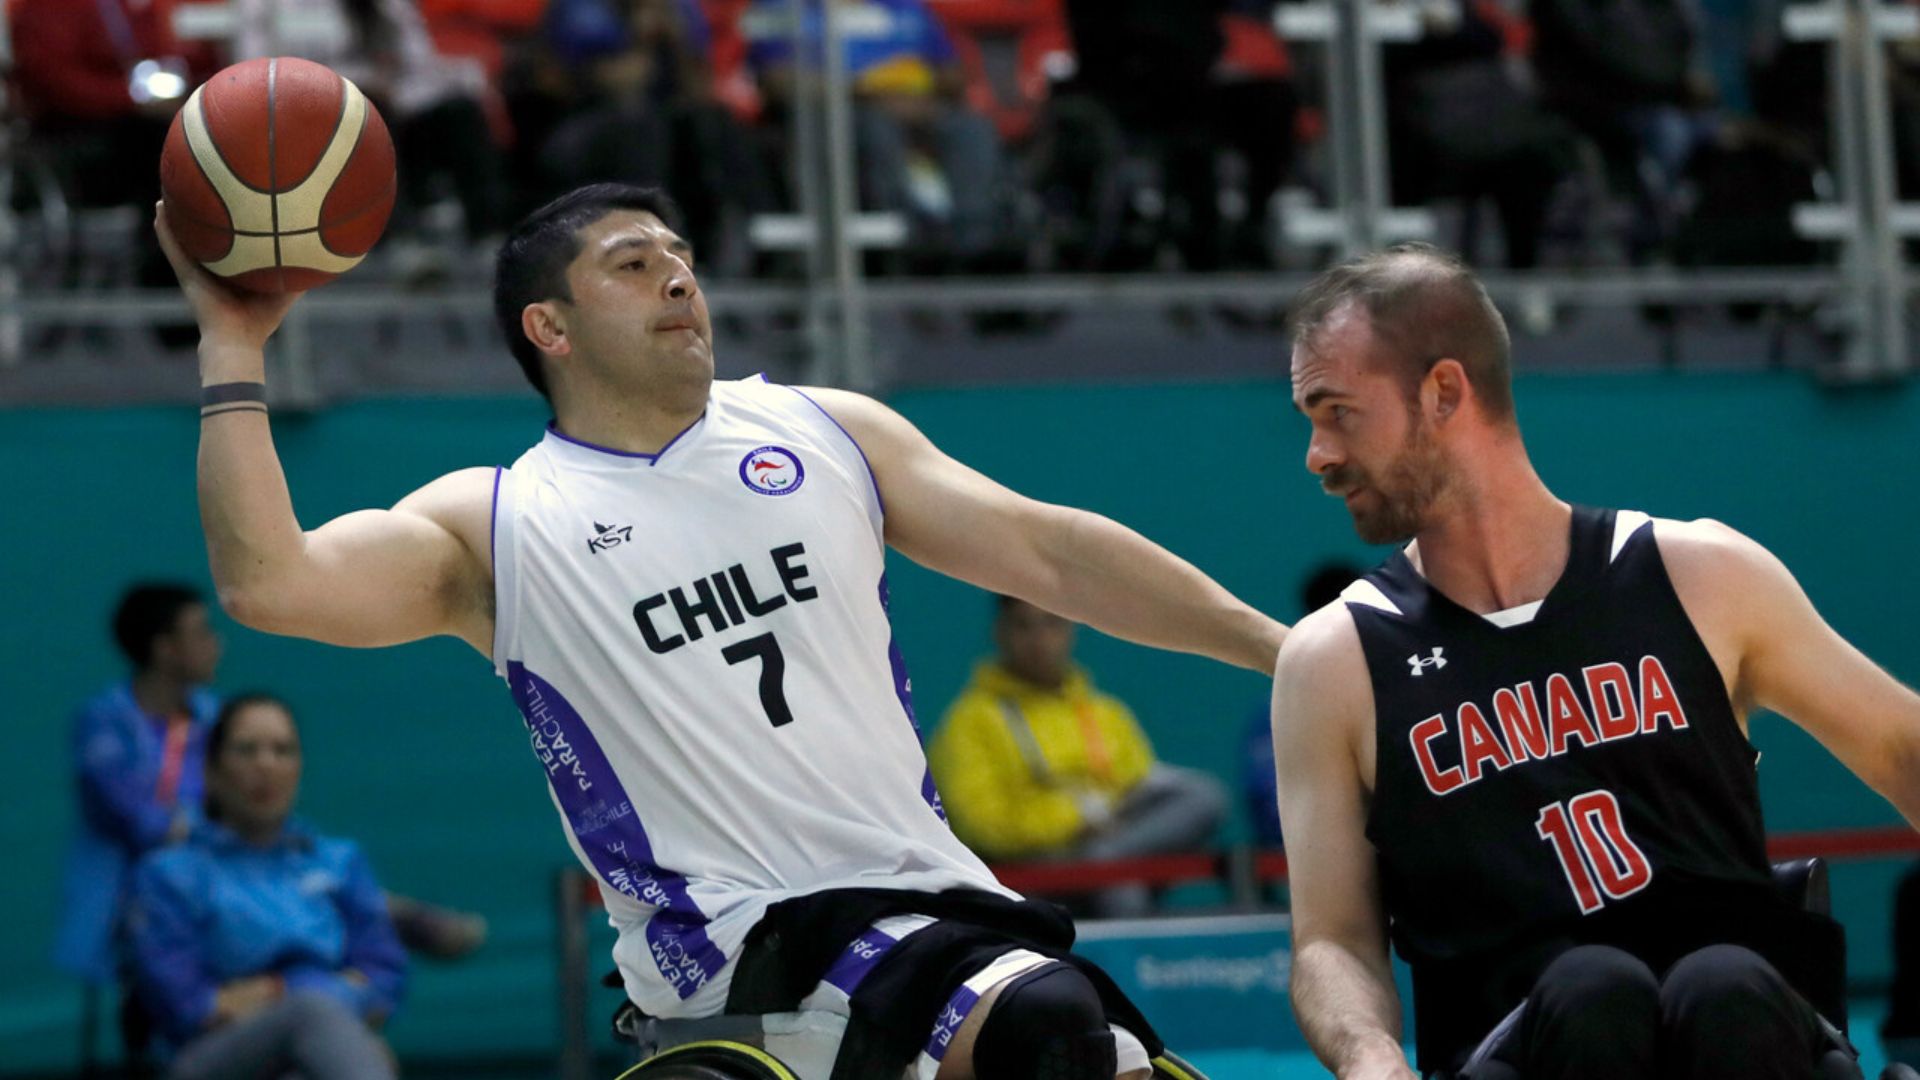 Chile Can't Overcome Canada in Their Debut in Wheelchair Basketball